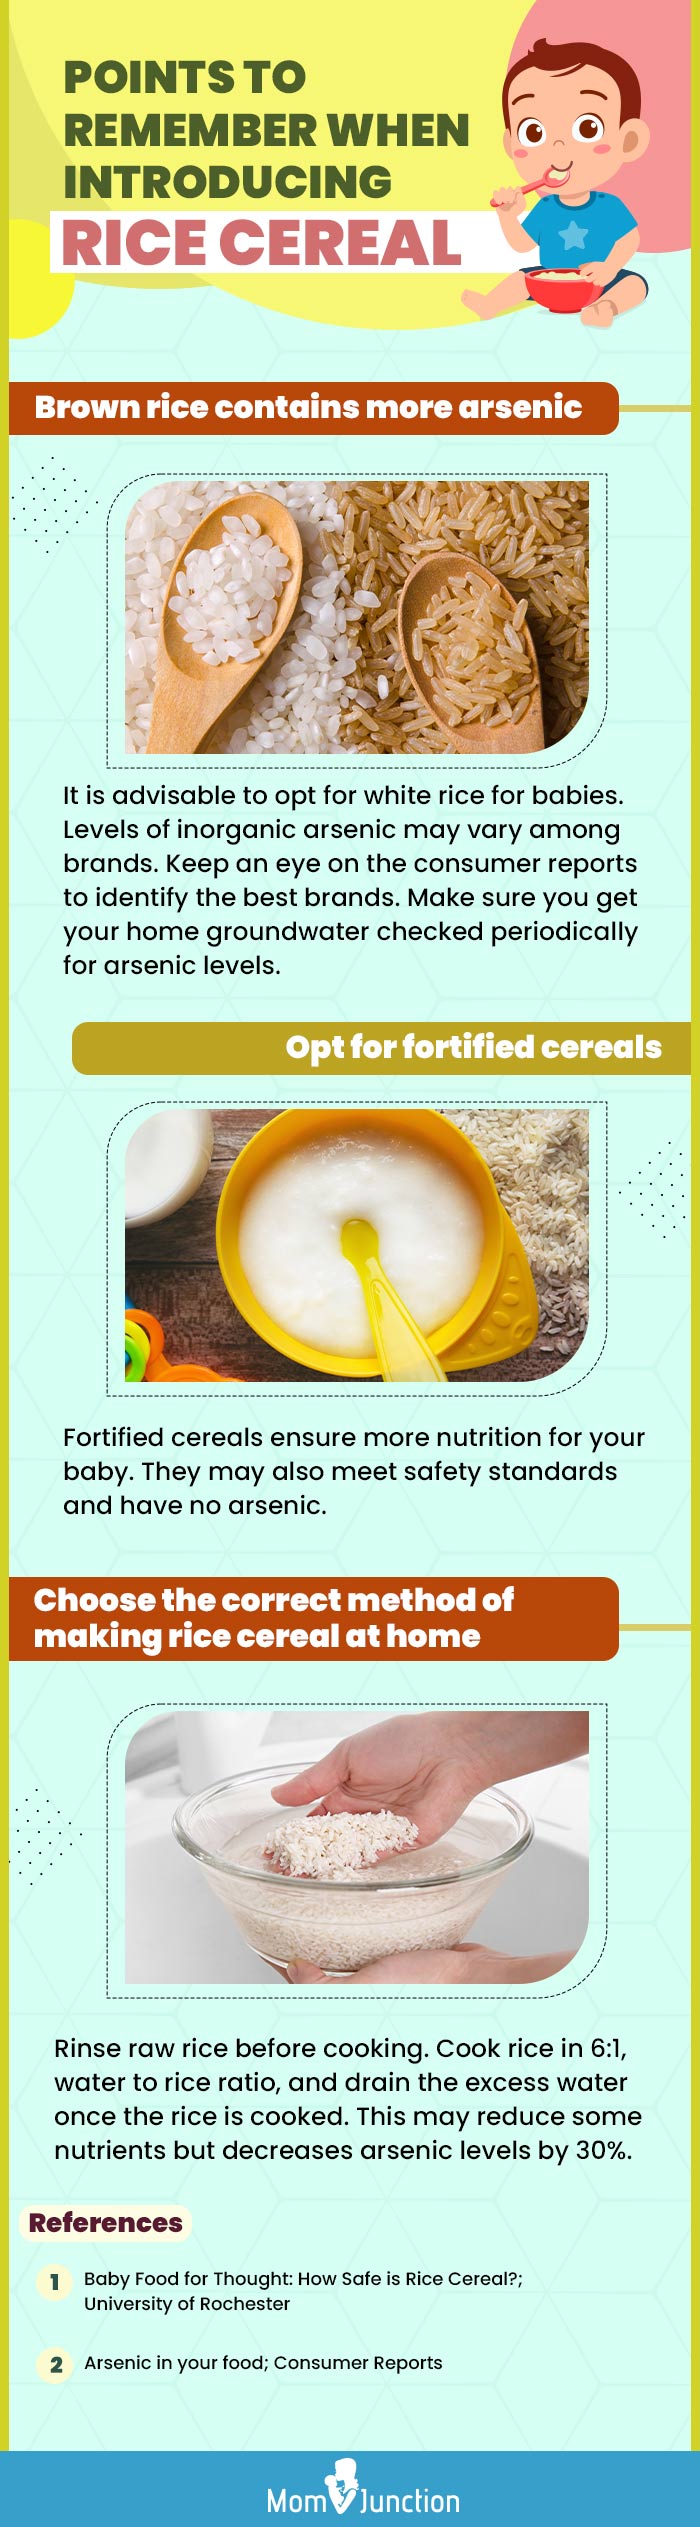 https://www.momjunction.com/wp-content/uploads/2021/01/Points-To-Remember-When-Introducing-Rice-Cereal-To-Babies.jpg